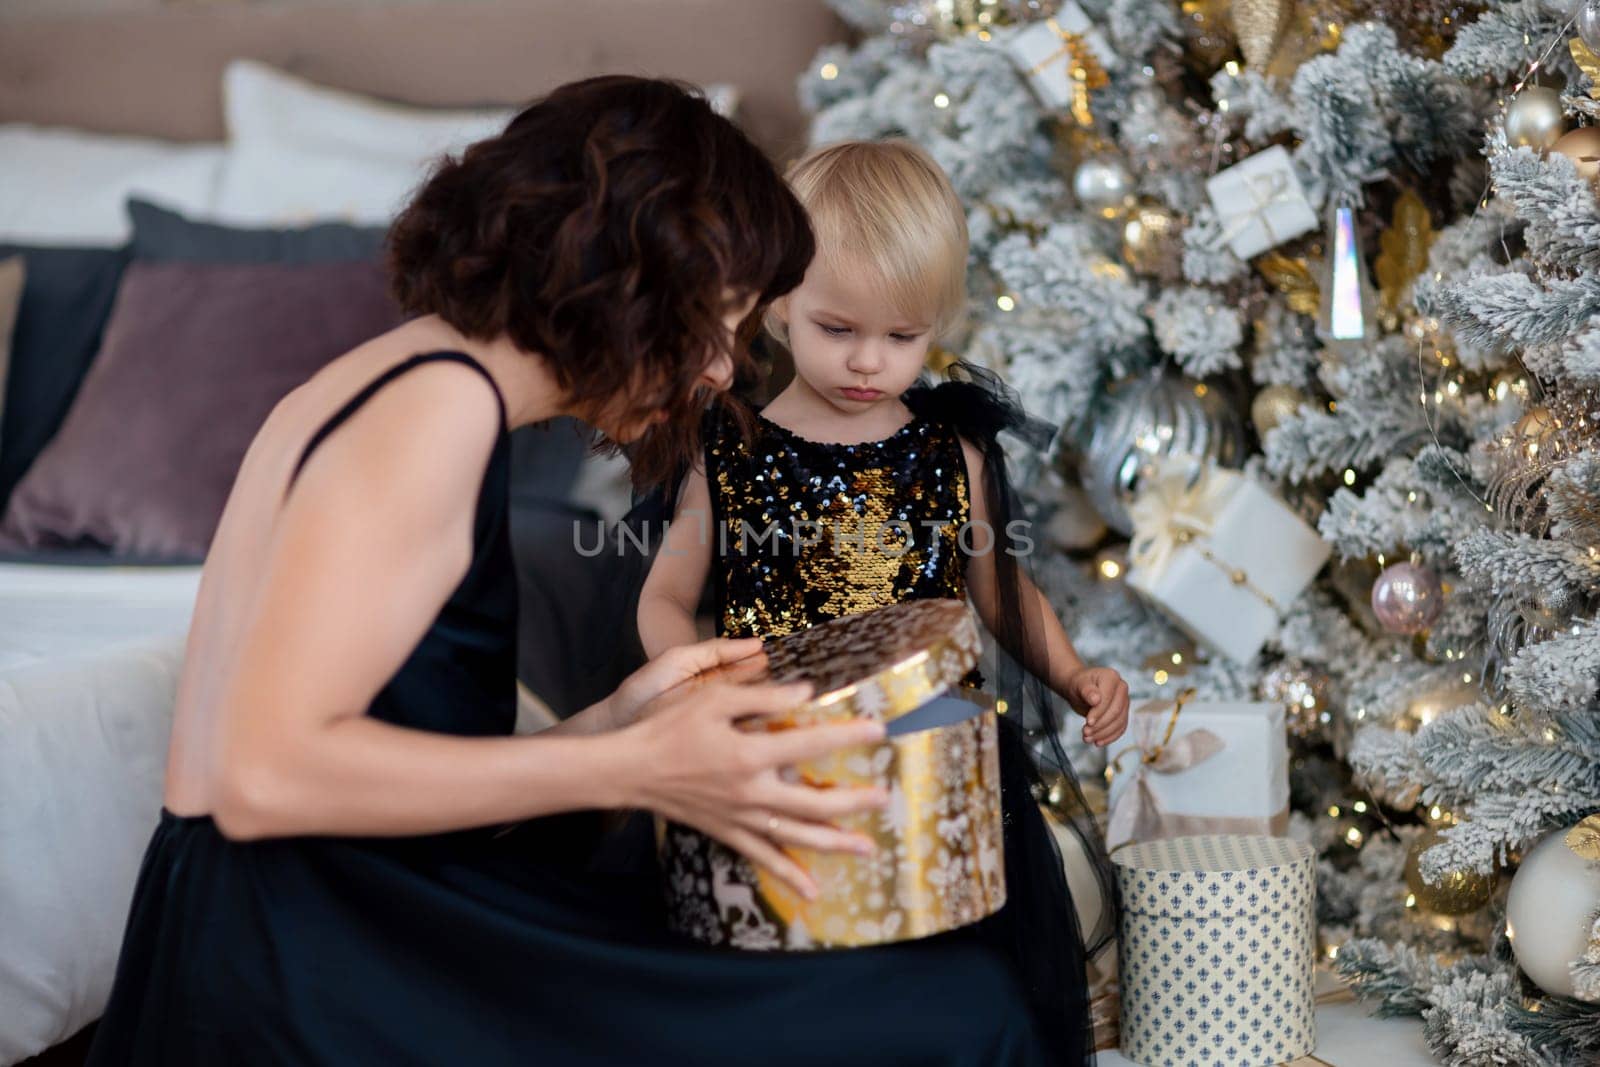 Mother daughter 2 years old Christmas tree. Both are dressed in black dresses, the mother holds the girl in her arms and both look at each other. The family celebrates Christmas. by Matiunina